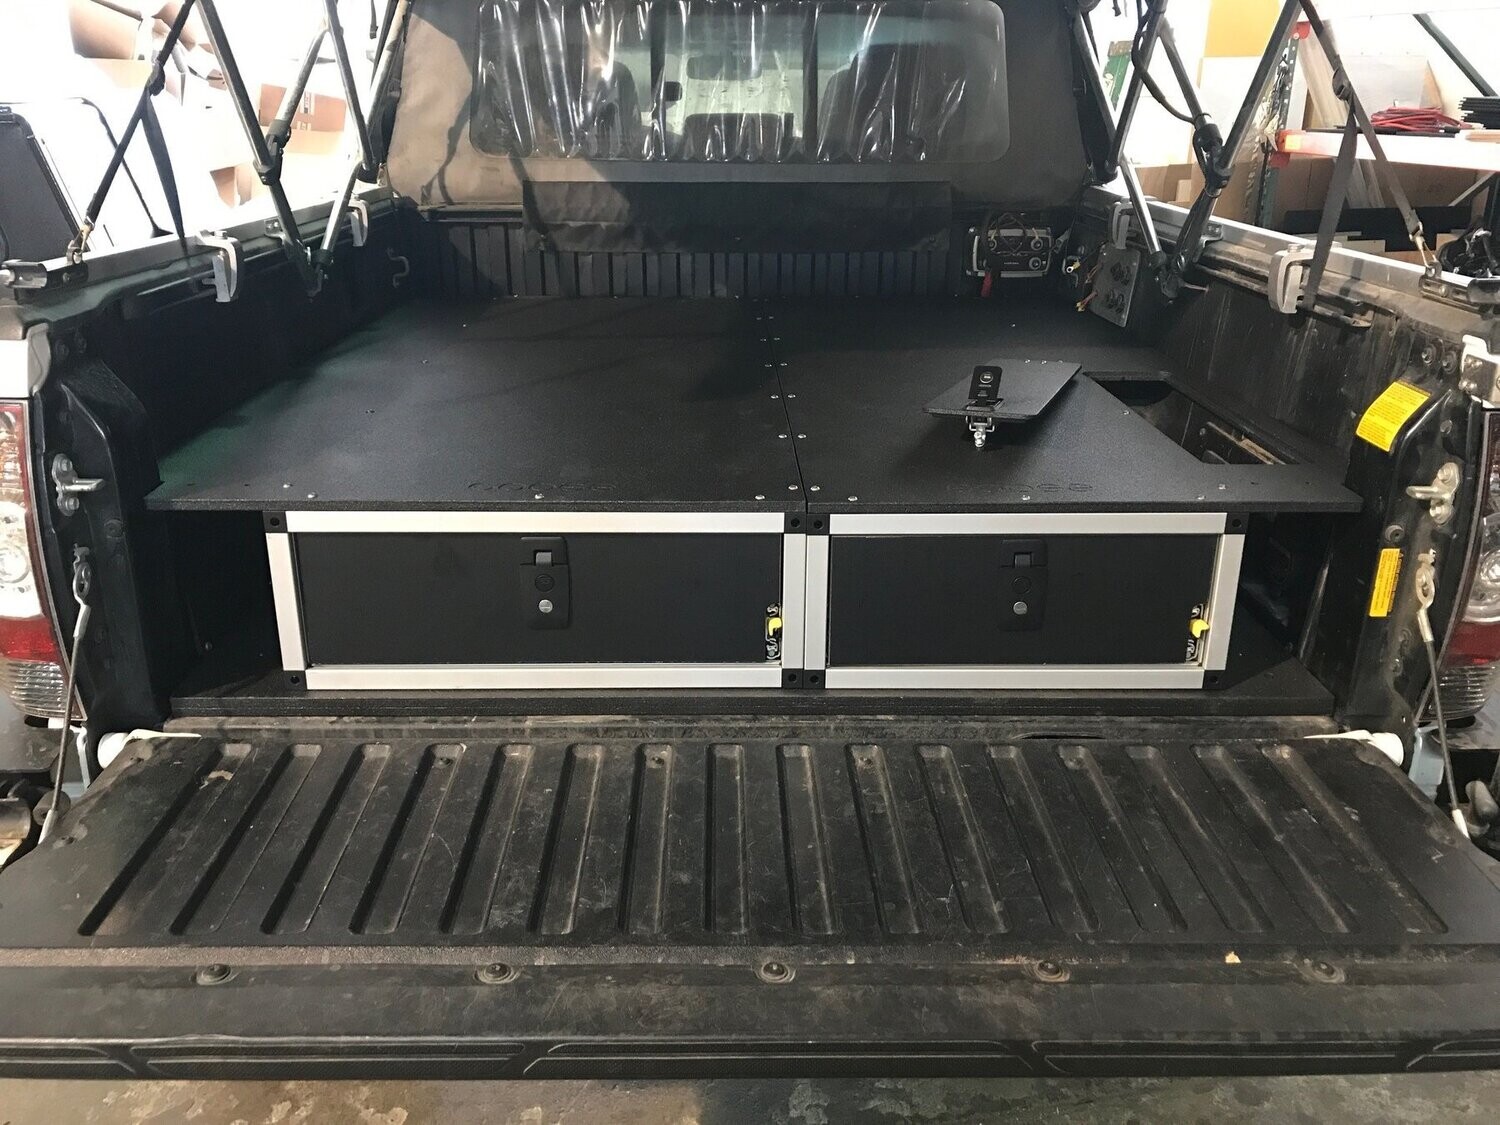 GOOSE GEAR - TOYOTA TACOMA 2005-PRESENT 2ND AND 3RD GEN. TRUCK BED SINGLE DRAWER MODULE - TOP PLATES